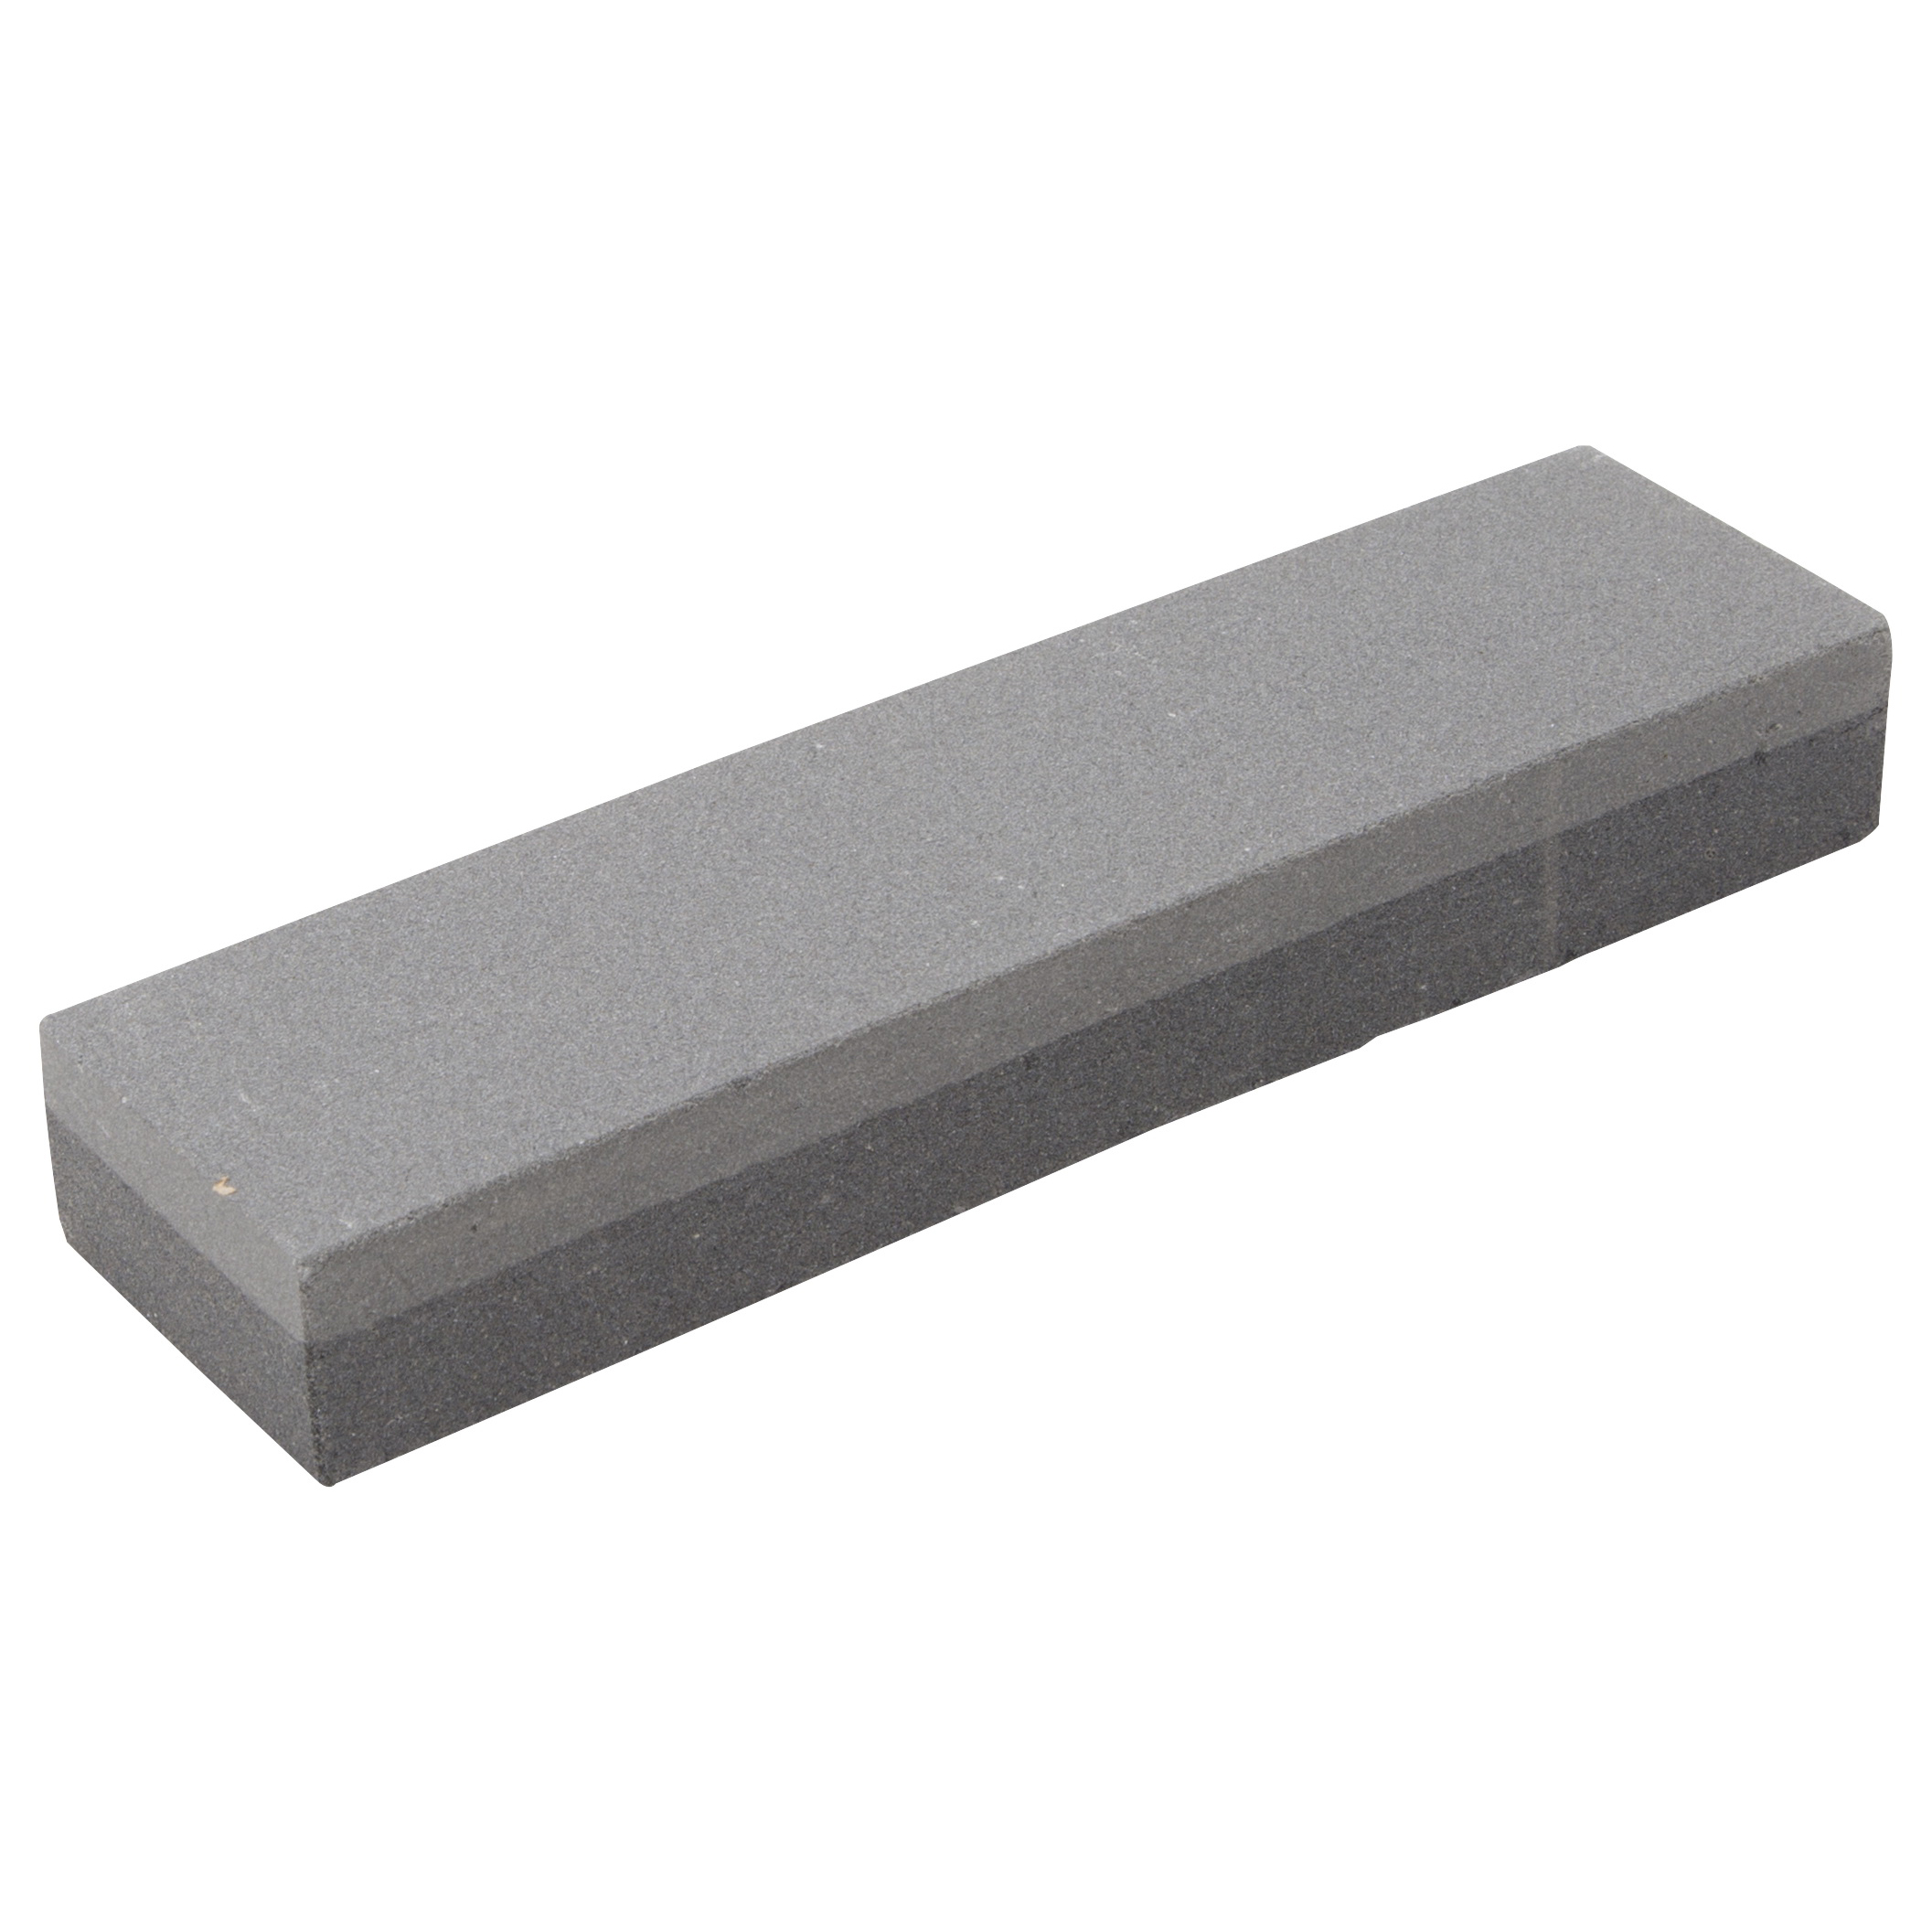 CLP0034S-8 Sharpening Stone, 8 in L, 2 in W, 1 in Thick, 120, 240 Grit, Coarse and Fine, Silicon Carbide Abrasive